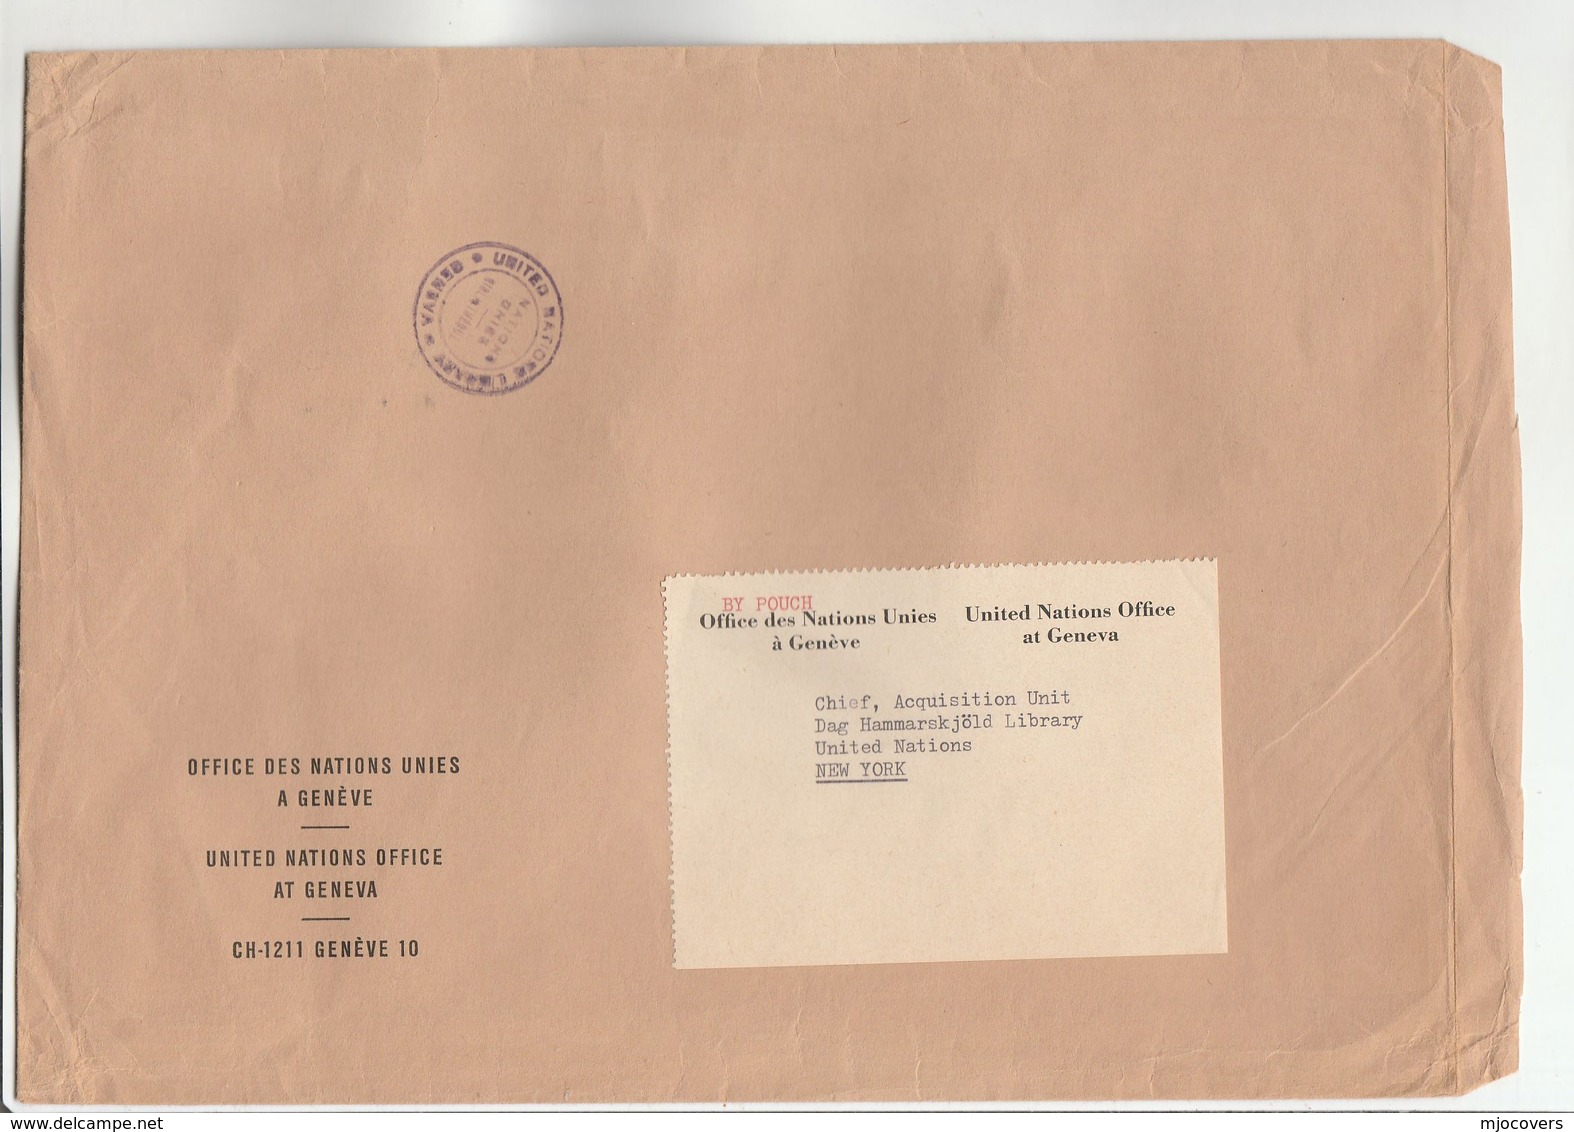 1970s UN GENEVE LIBRARY Via DIPLOMATIC BAG 'Pouch' With UNITED NATIONS GENEVE ADDRESS LABEL To UN NY LIBRARY USA Cover - UNO